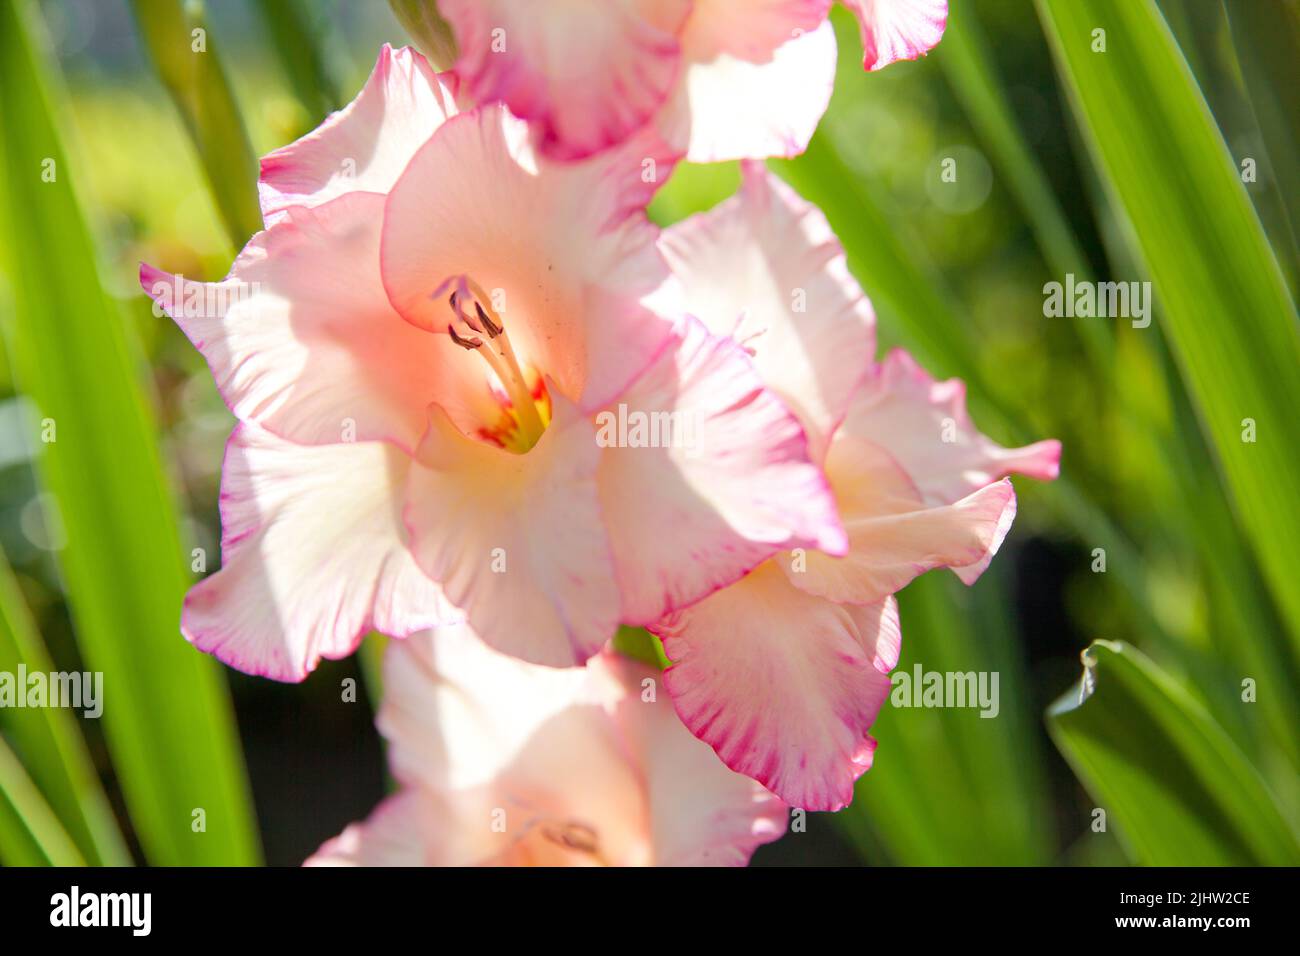 Beautiful pink gladiolus close-up on green background. Garden gladiolus is a plant that does not hibernate in the ground. Forms scaly, one year old tu Stock Photo